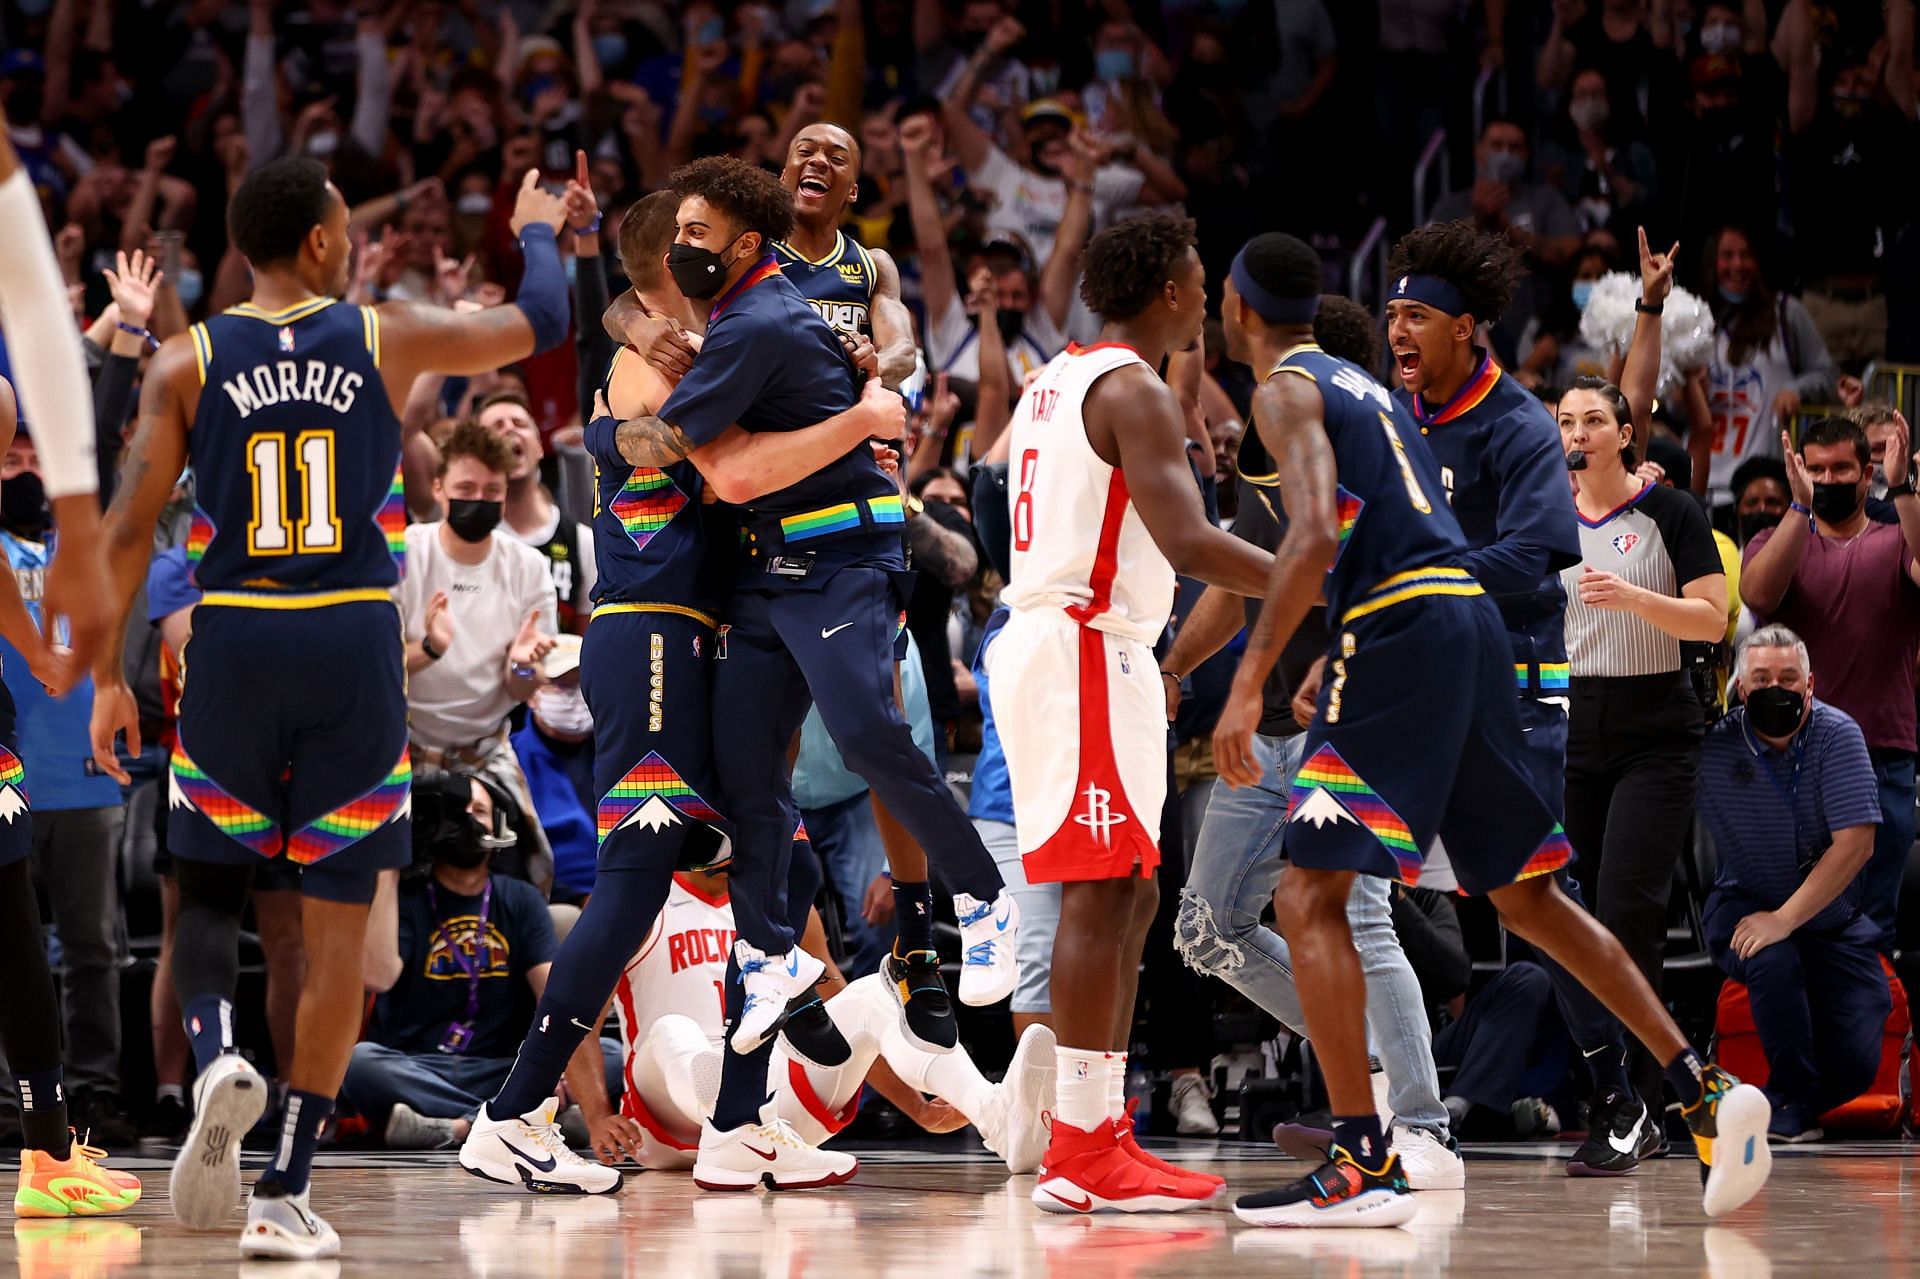 Denver Nuggets celebrate their win against the Rockets.